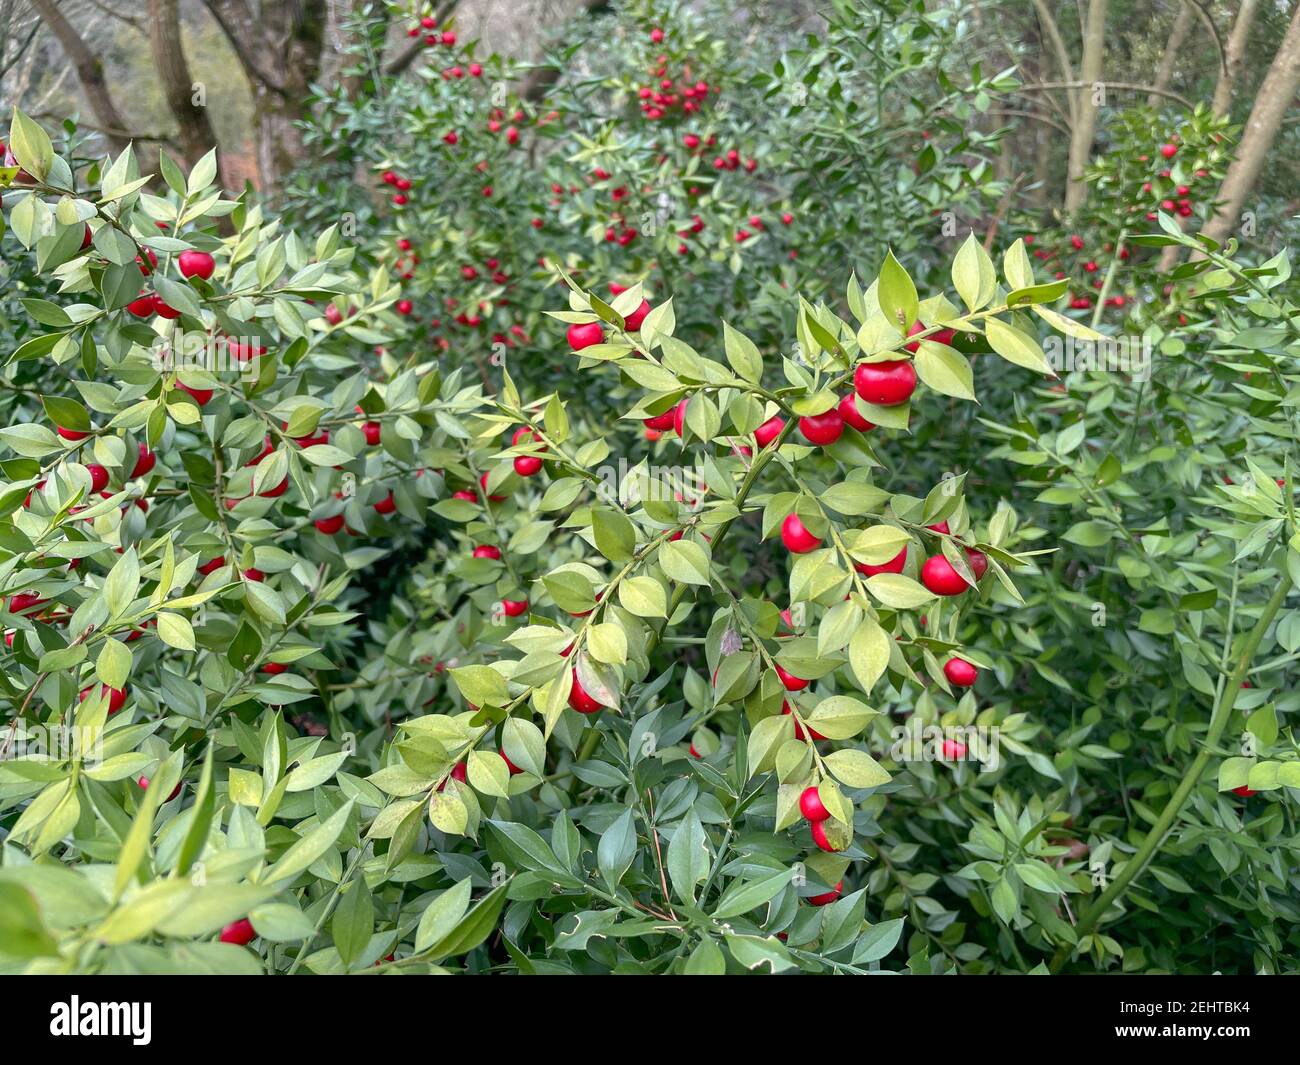 Lush Winter Green Foliage and Red Berries on the Evergreen Butcher's Broom Shrub (Ruscus aculeatus 'Hermaphrodite') Growing in a Woodland Garden Stock Photo